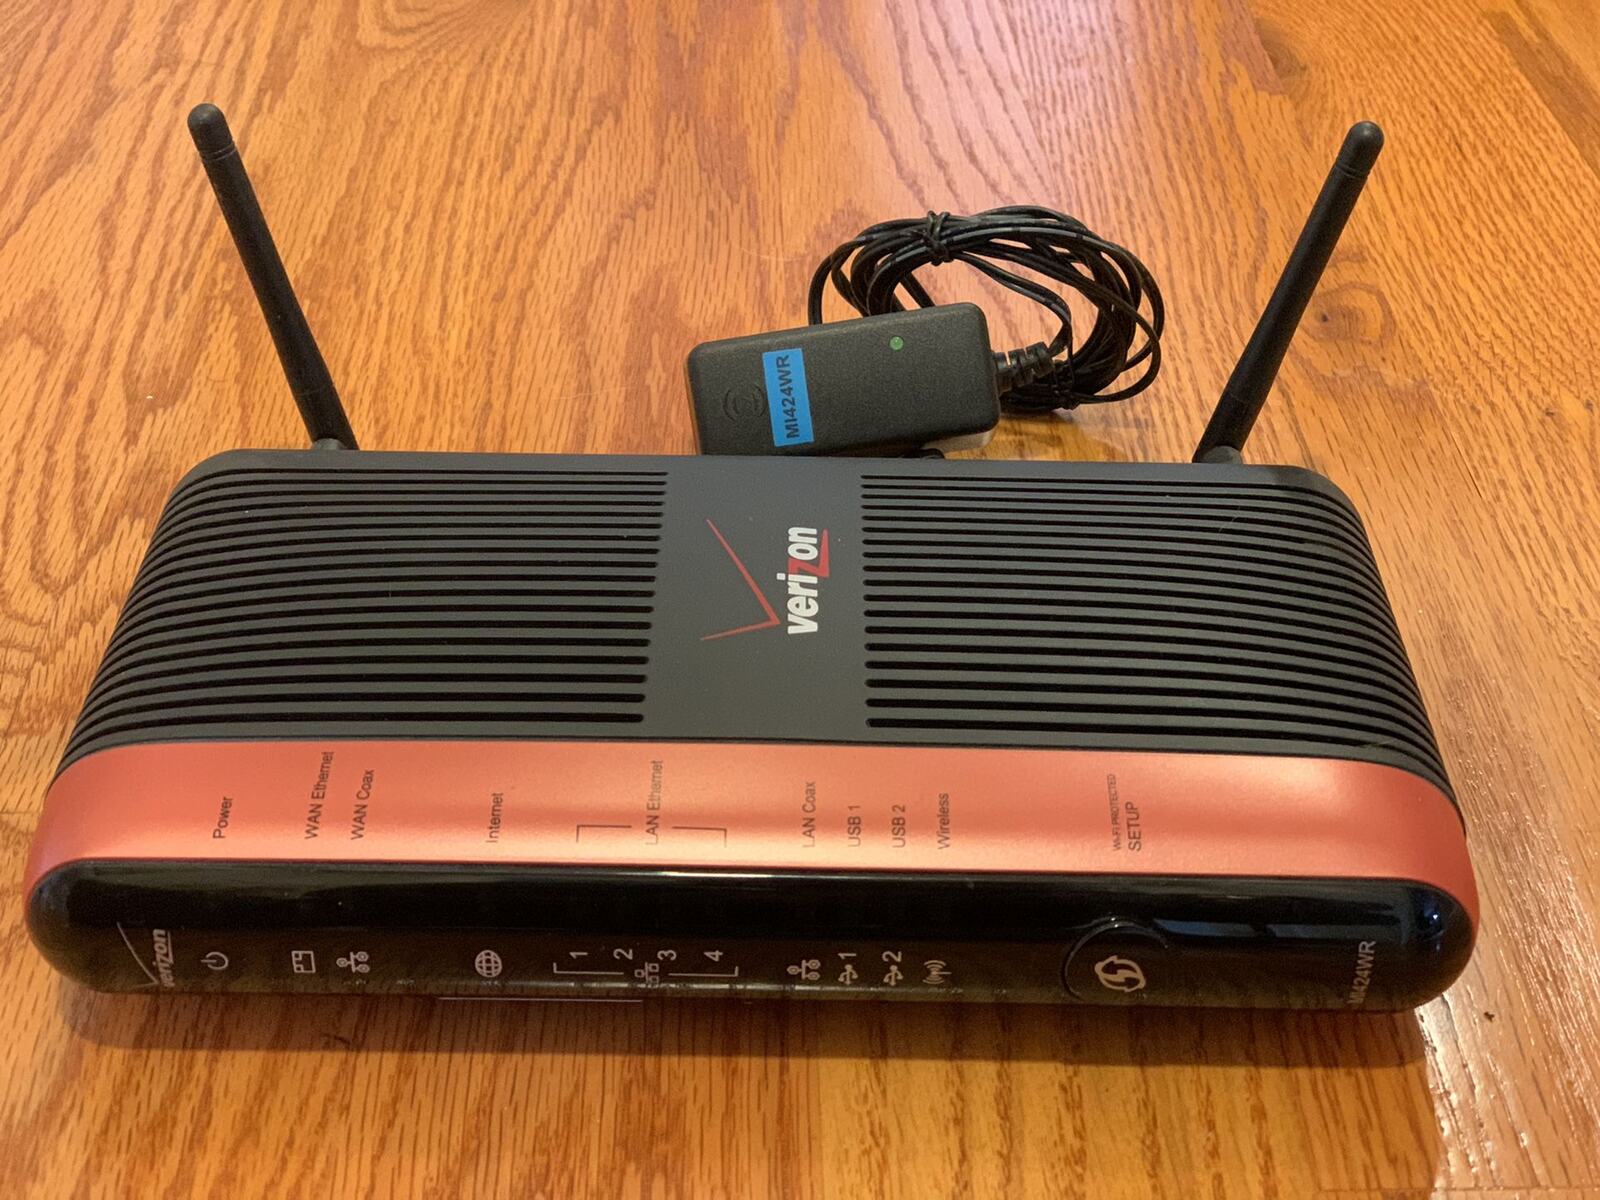 How To Connect To Verizon Fios Wireless Router